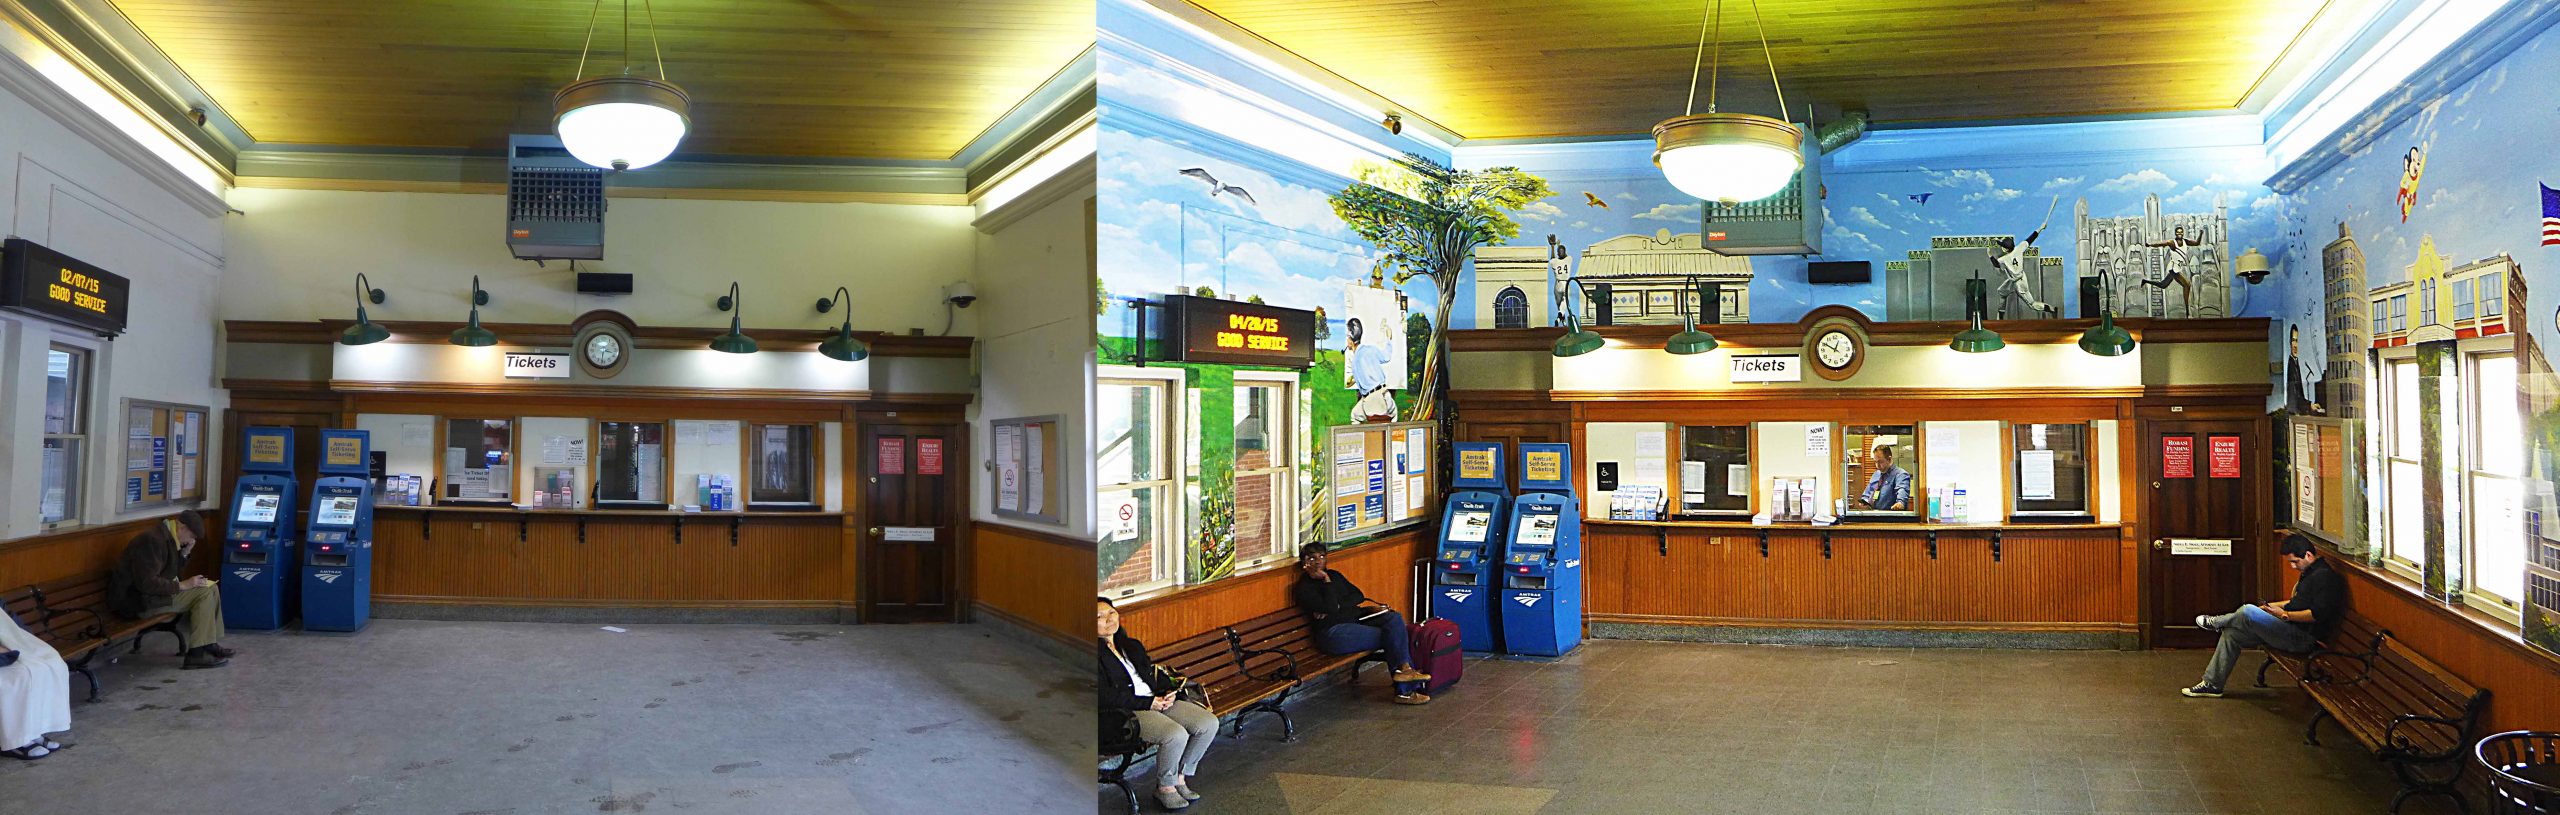 Story of New Rochelle Murals